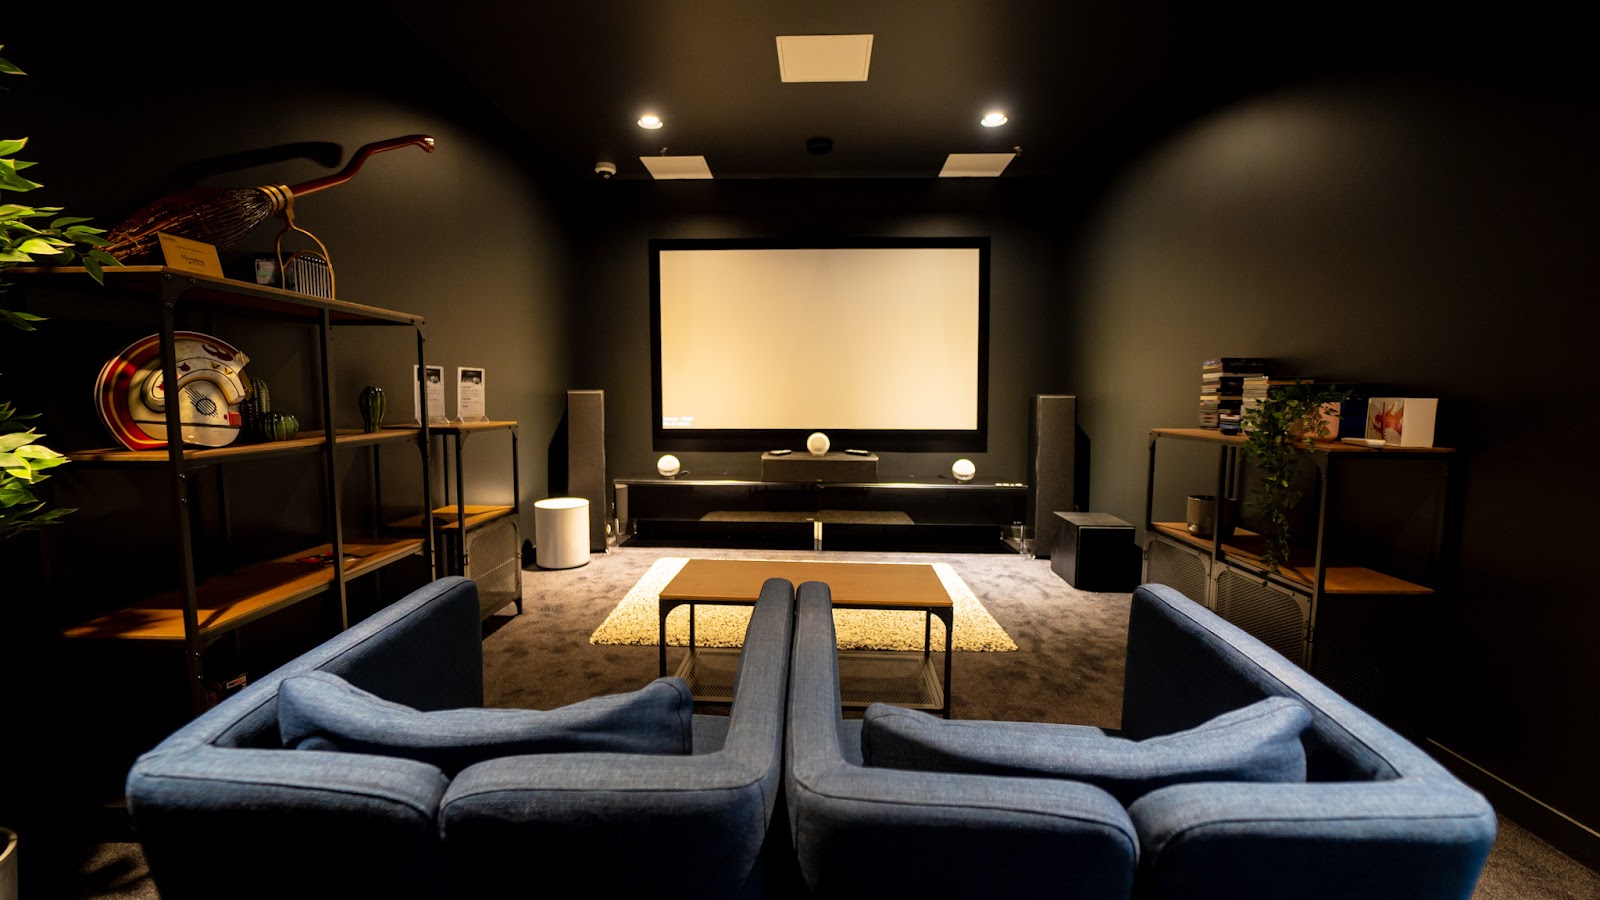 The Emmy Awards cinema room: a home theater system like the one at home -  Son-Vidéo.com: blog